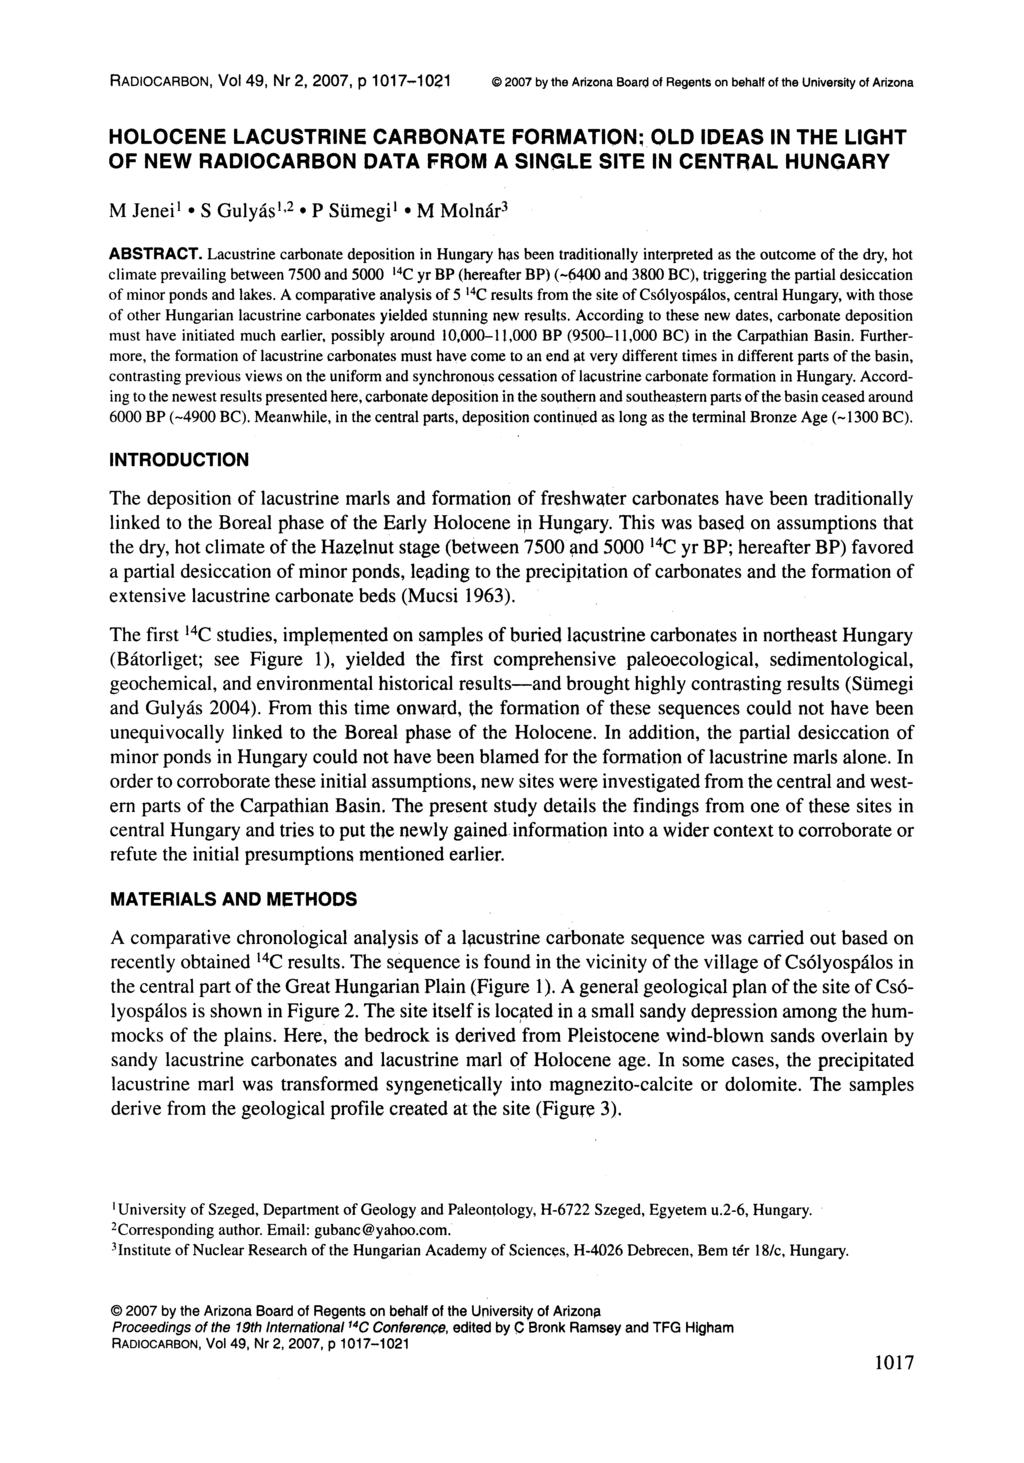 RADIOCARBON, Vol 49, Nr 2, 2007, ρ 1017-1021 2007 by the Arizona Boarq" of Regents on behalf of the University of Arizona HOLOCENE LACUSTRINE CARBONATE FORMATION; OLD IDEAS IN THE LIGHT OF NEW